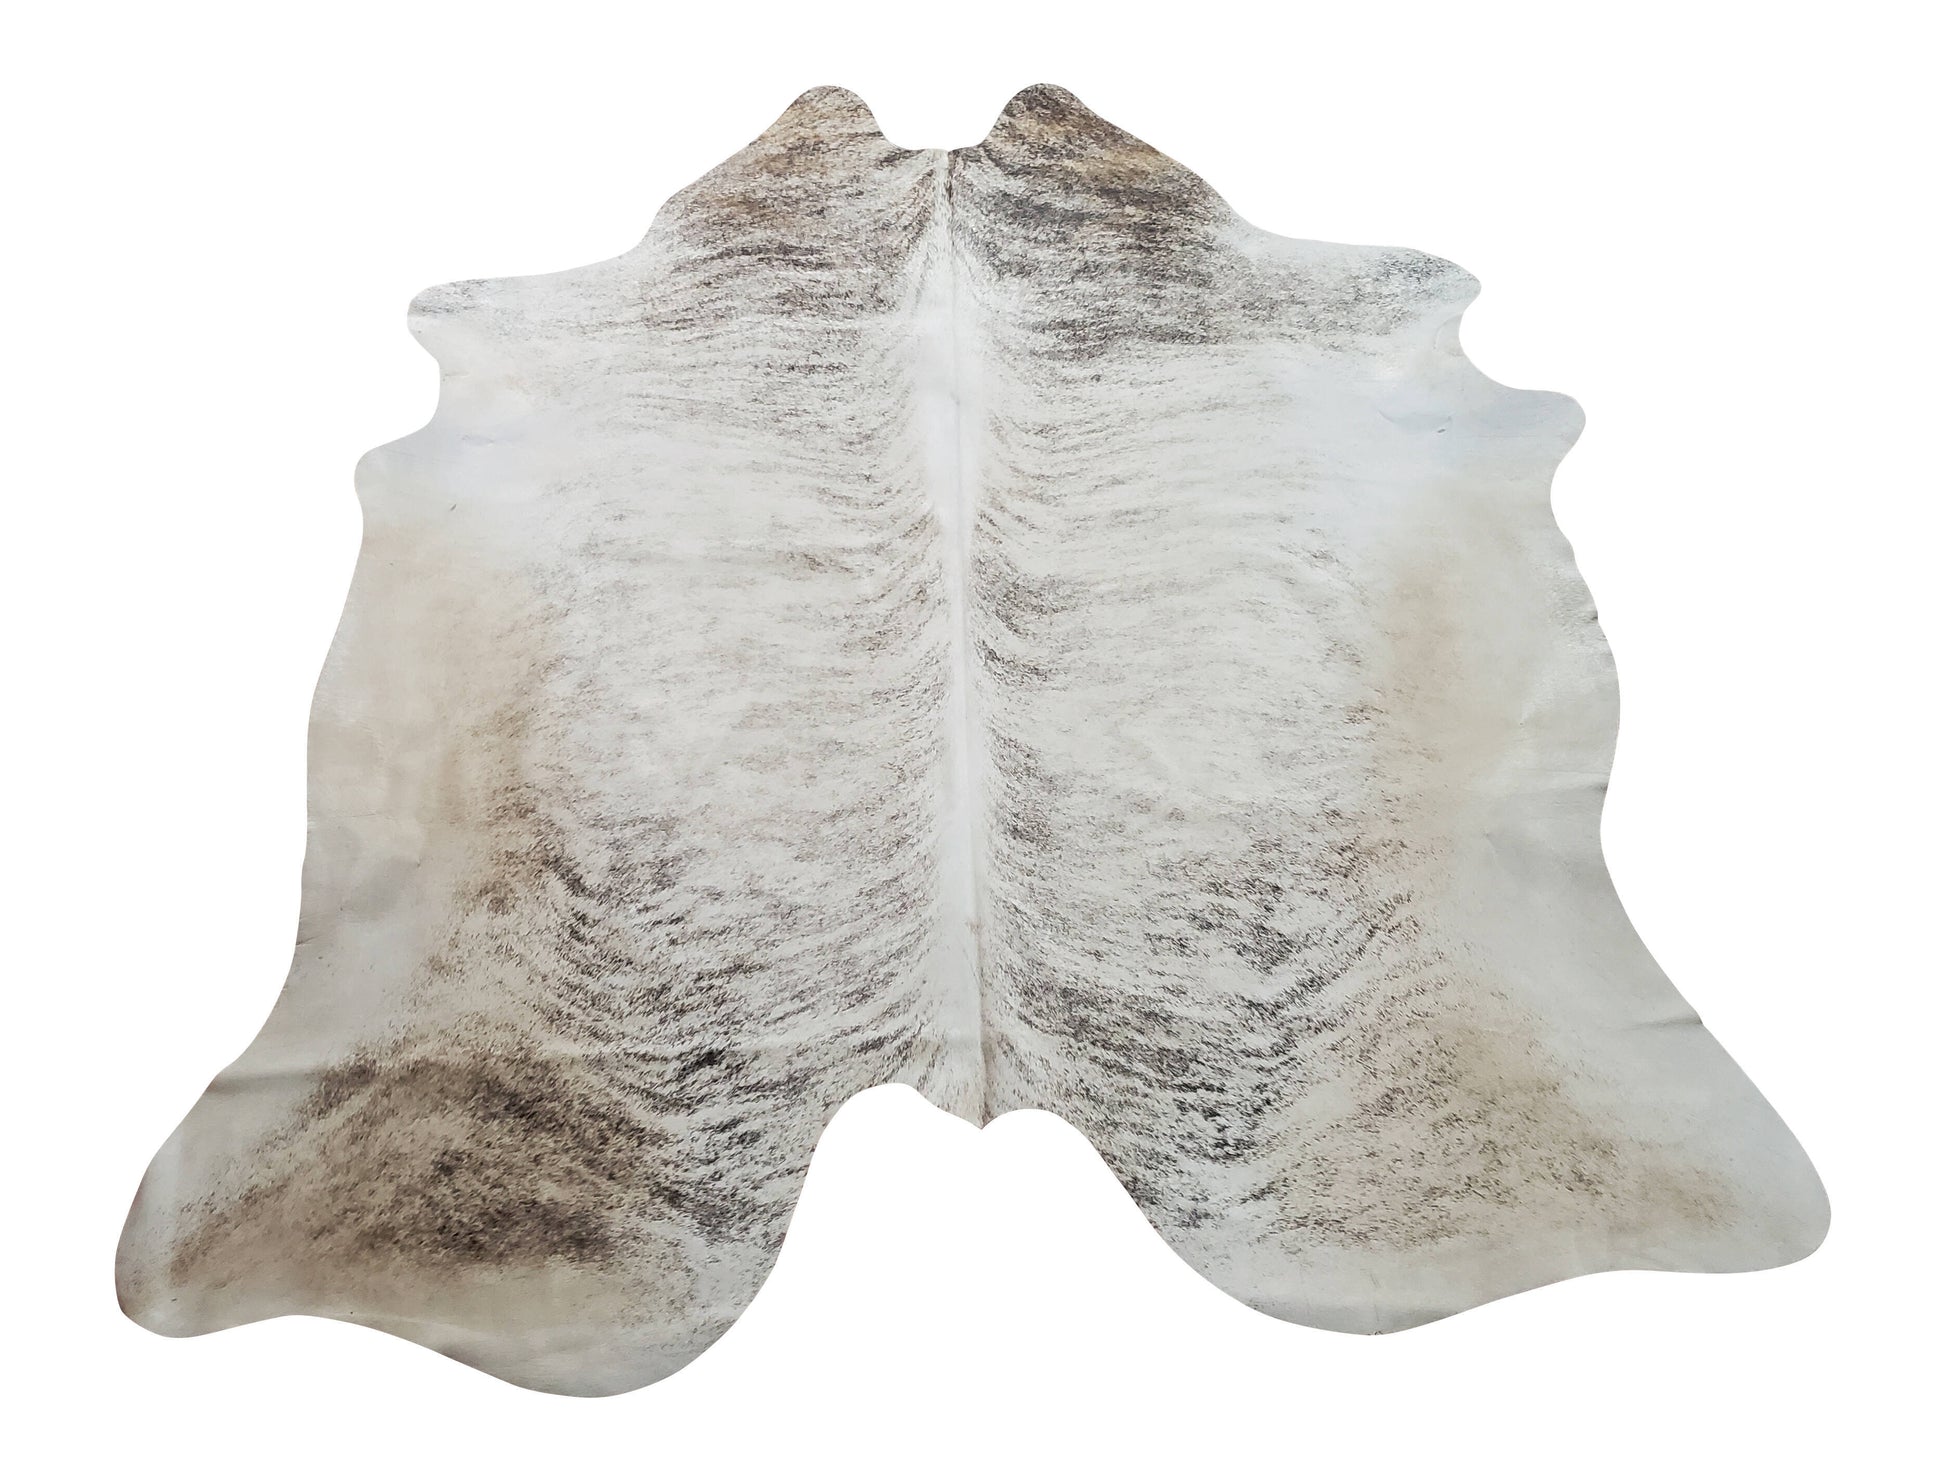 There's no need for an under pad, as these brindle cowhide rugs will naturally grip the floor and stay in place. Plus, it's easy to clean - just vacuum or shake out as needed.